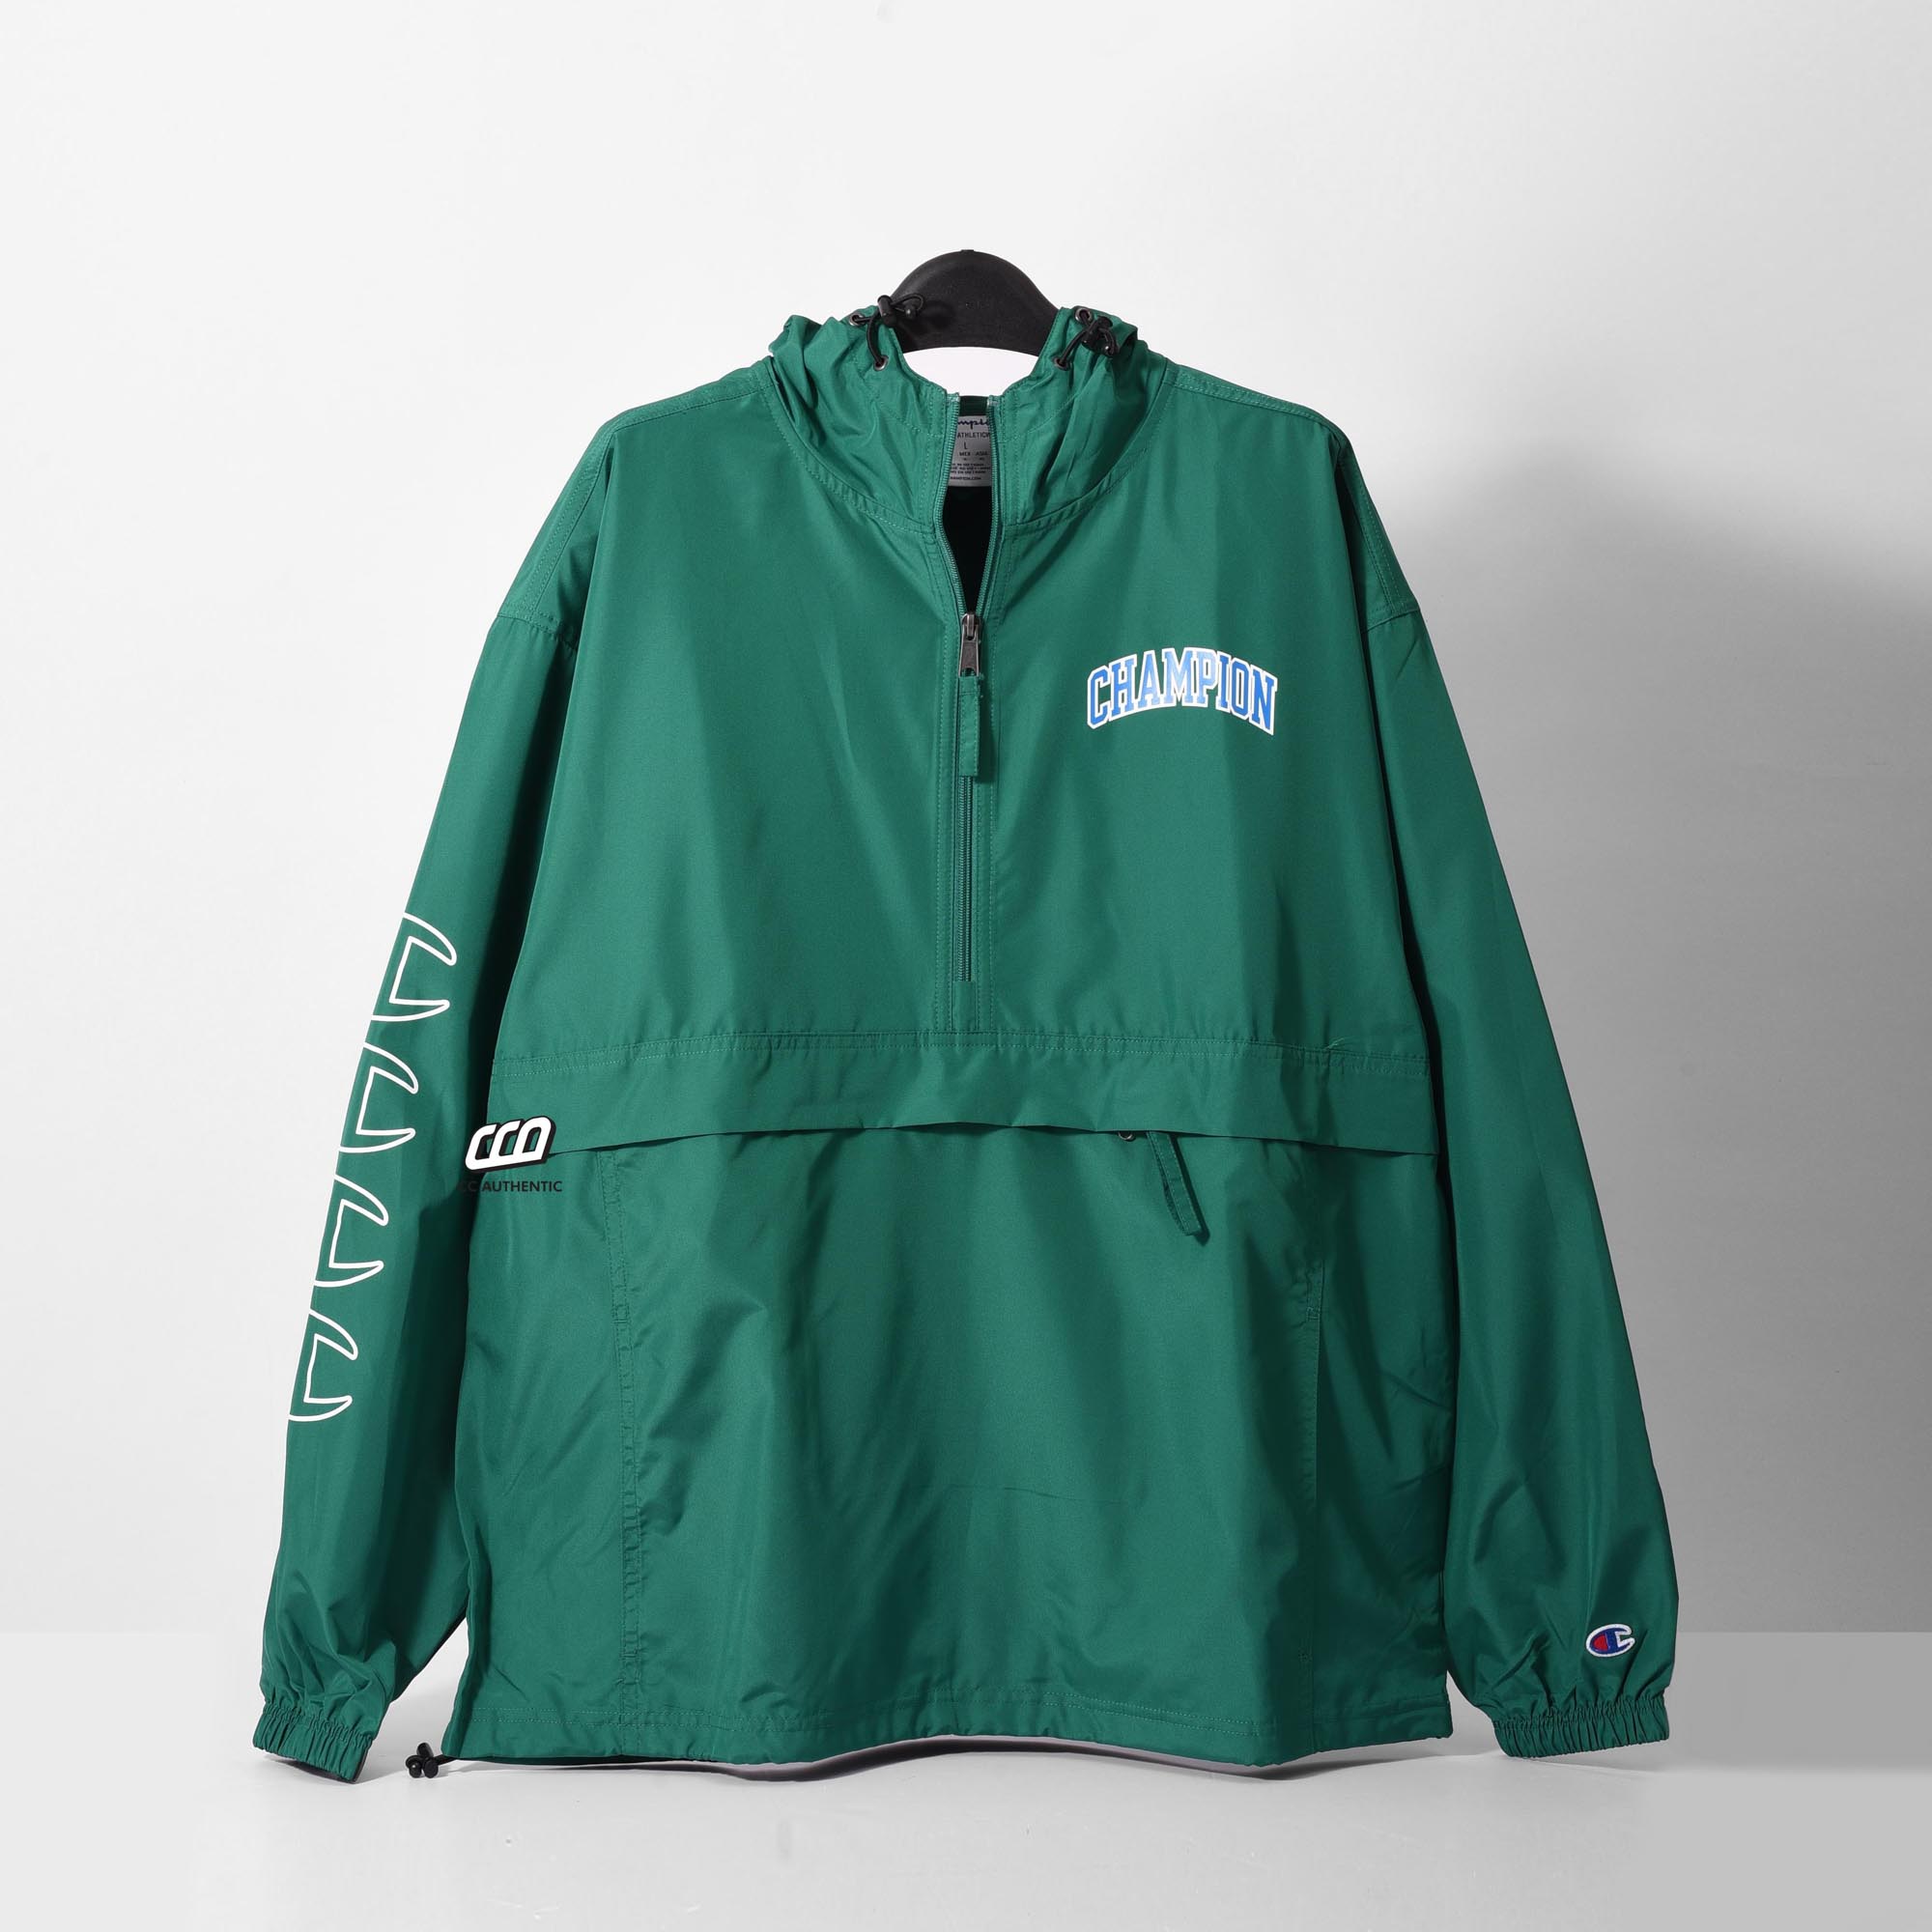 CHAMPION PACKABLE JACKET - GREEN